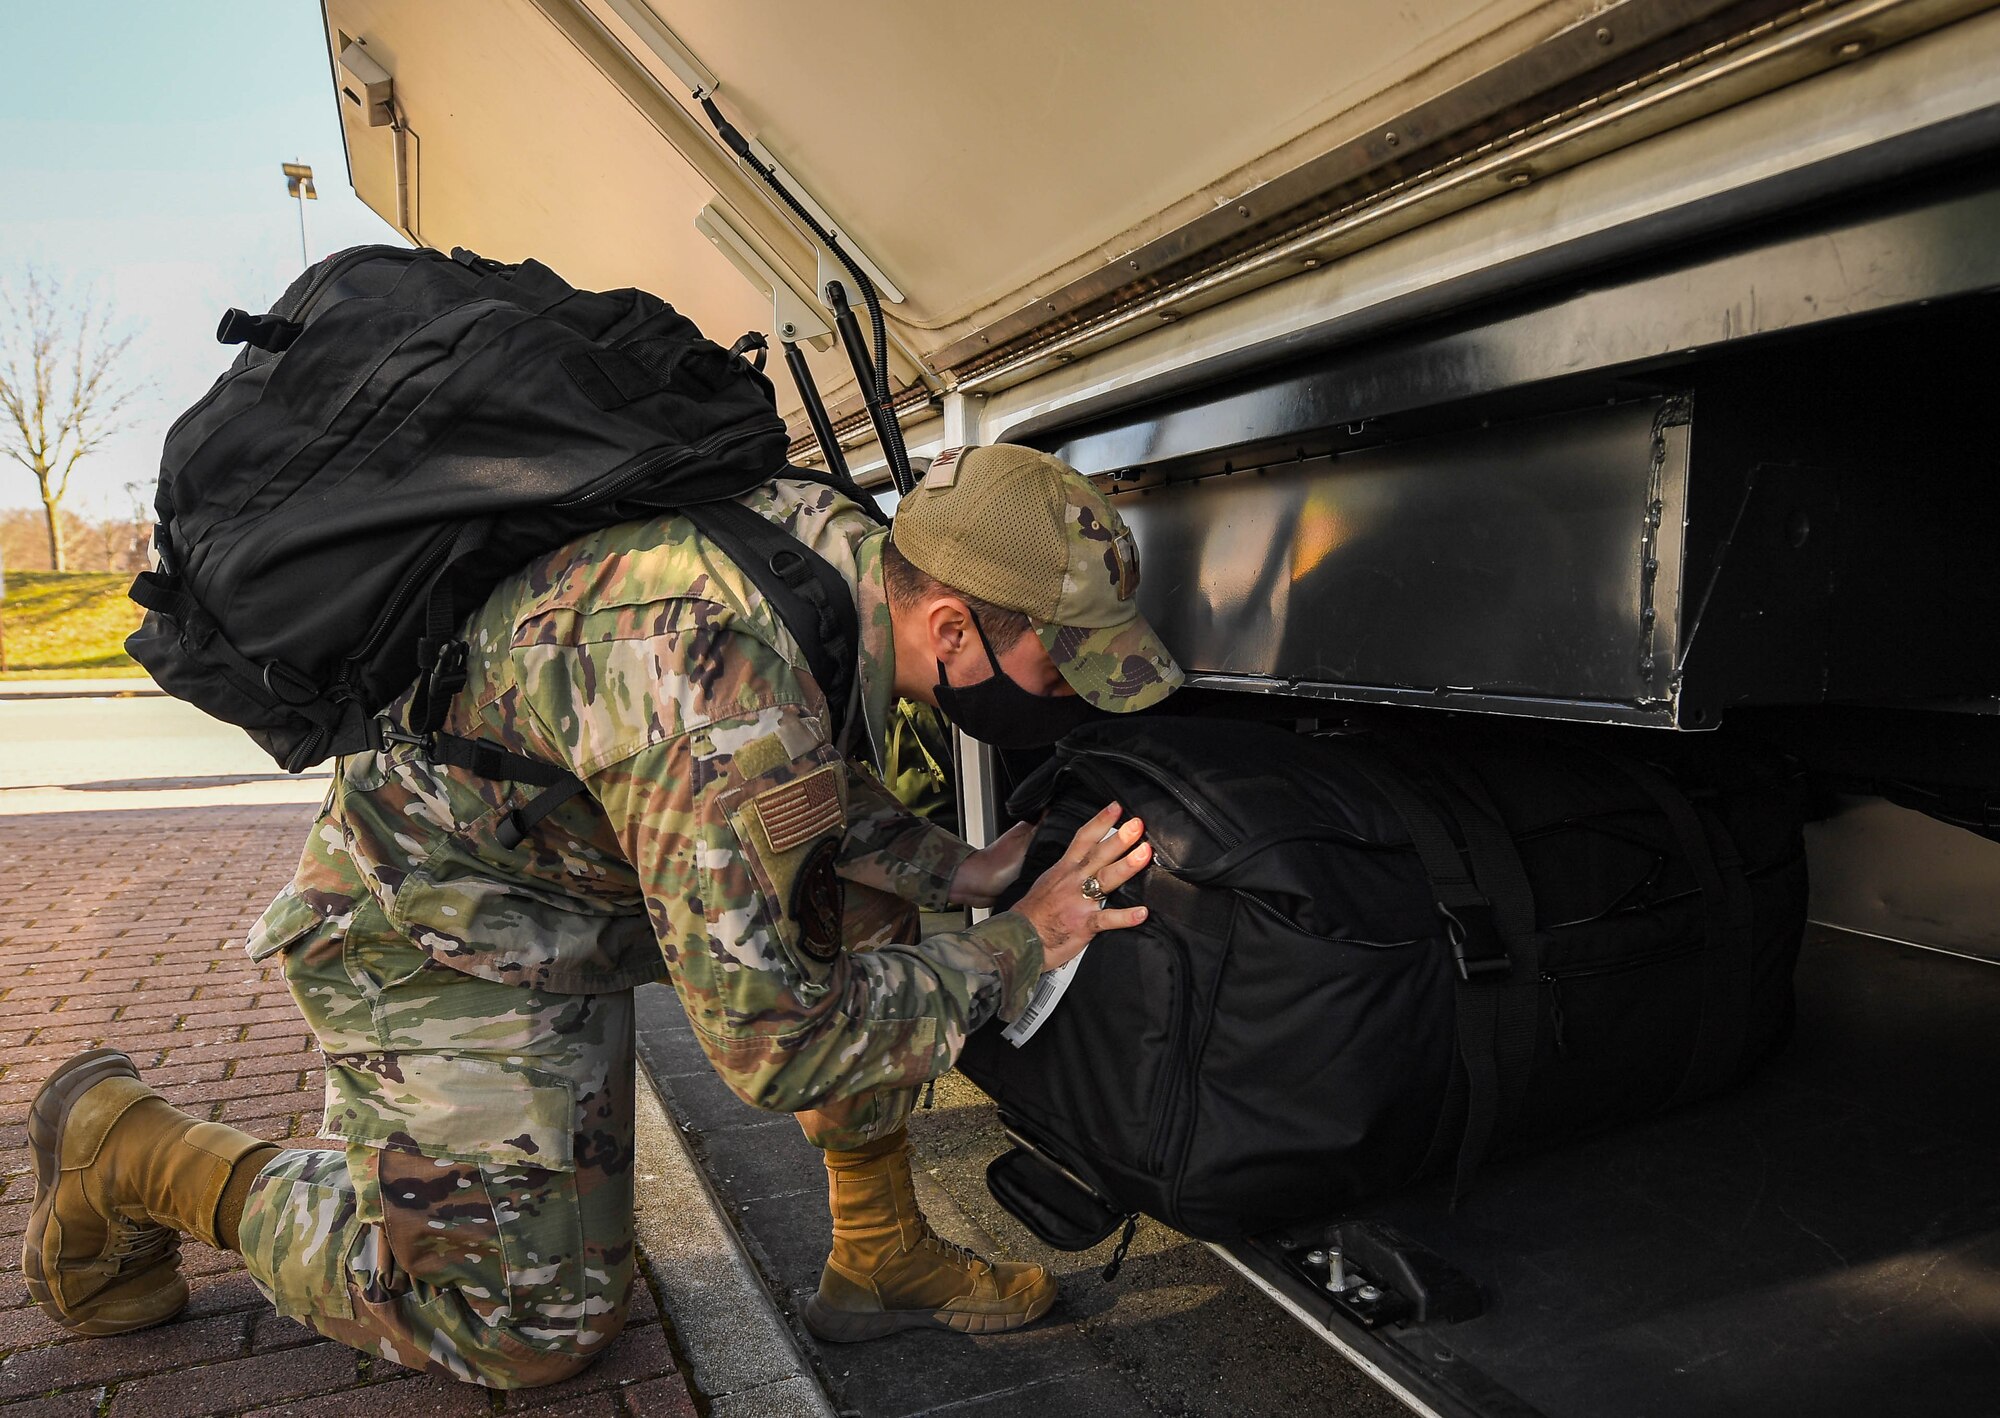 U.S. Air Force 2nd Lt. Andrew Bogdan, 47th Comptroller Squadron financial analysis flight commander assigned to Laughlin Air Base, Texas, loads his luggage onto a shuttle bus at Ramstein Air Base, Germany, March 8, 2022. Service members are increasingly arriving at RAB for mission support, and  ground transportation Airmen are available around-the-clock to bring them where they need to be through  a shuttle bus service. A QR code is available at on-base bus stops to provide bus stop times.  (U.S. Air Force photo by Airman 1st Class Jared Lovett)